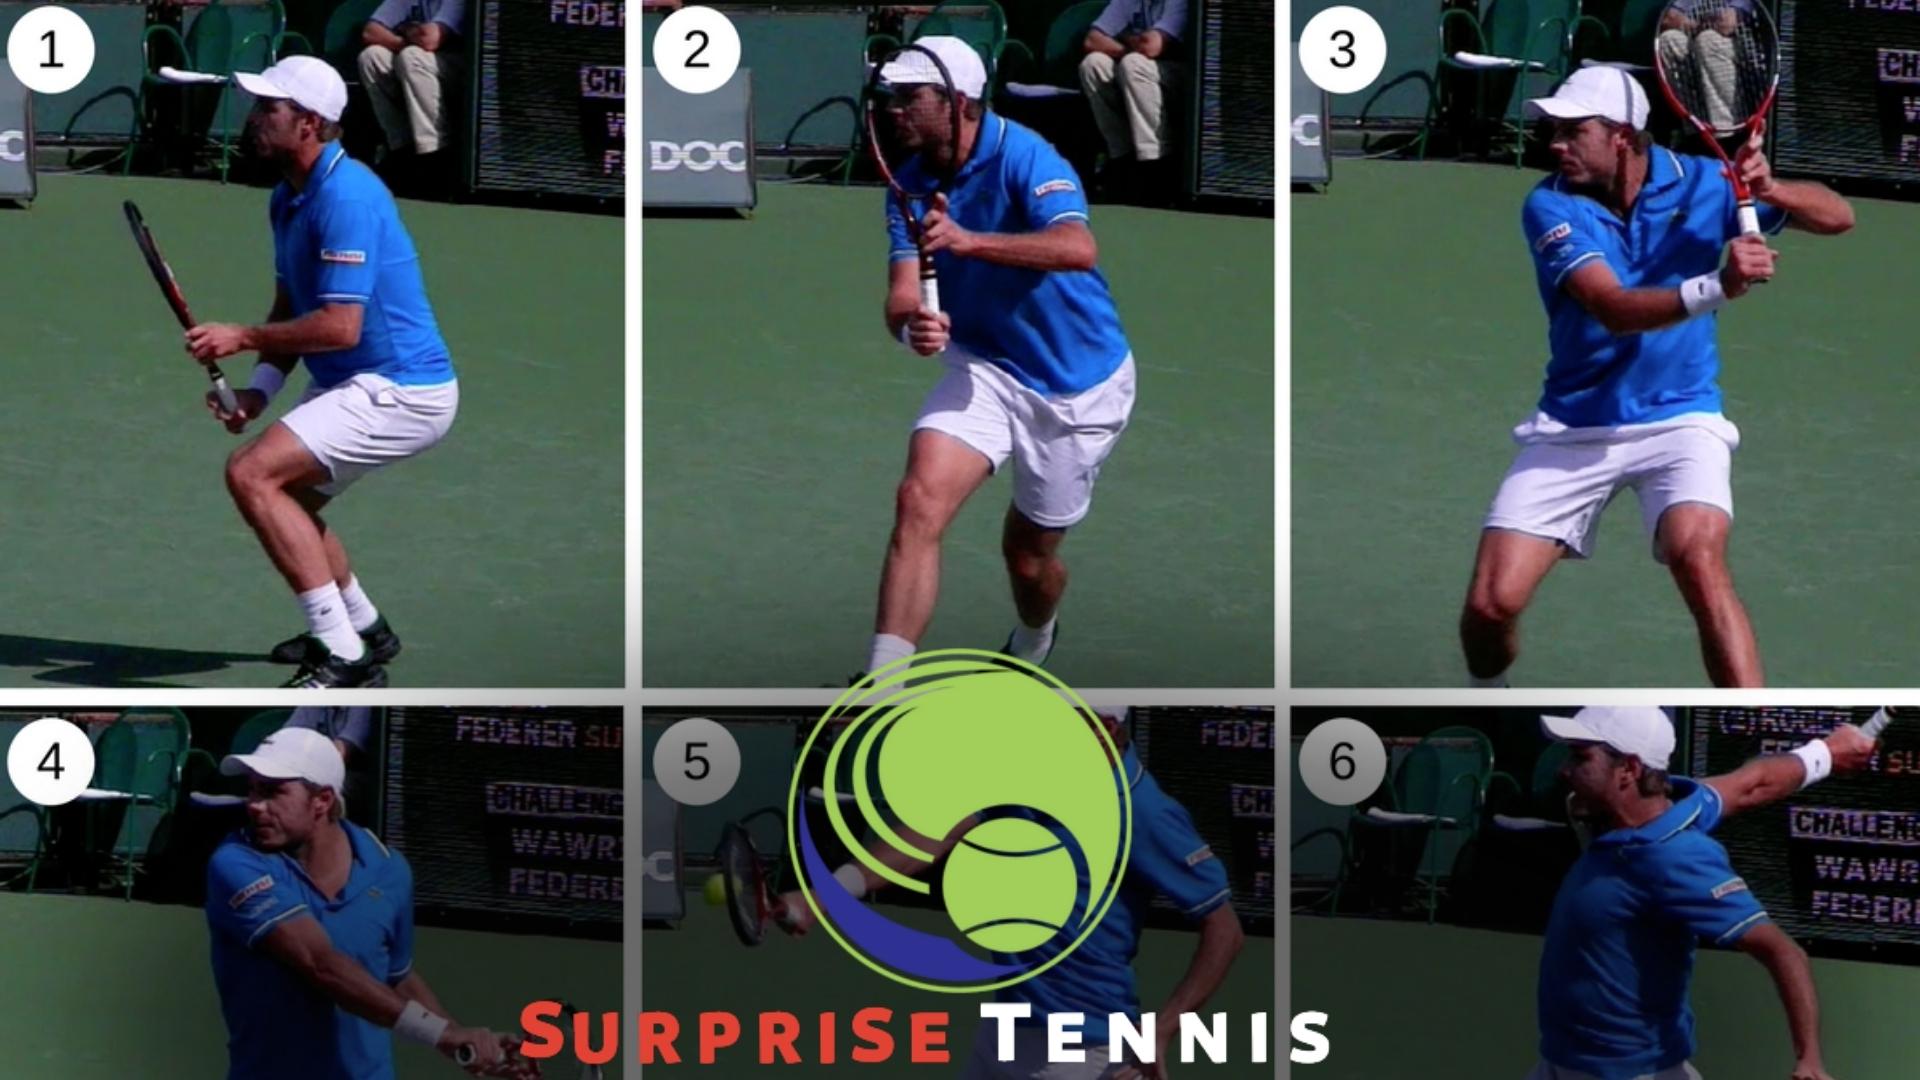 How to Hit a Backhand Tennis Shot – Step-by-Step Guide